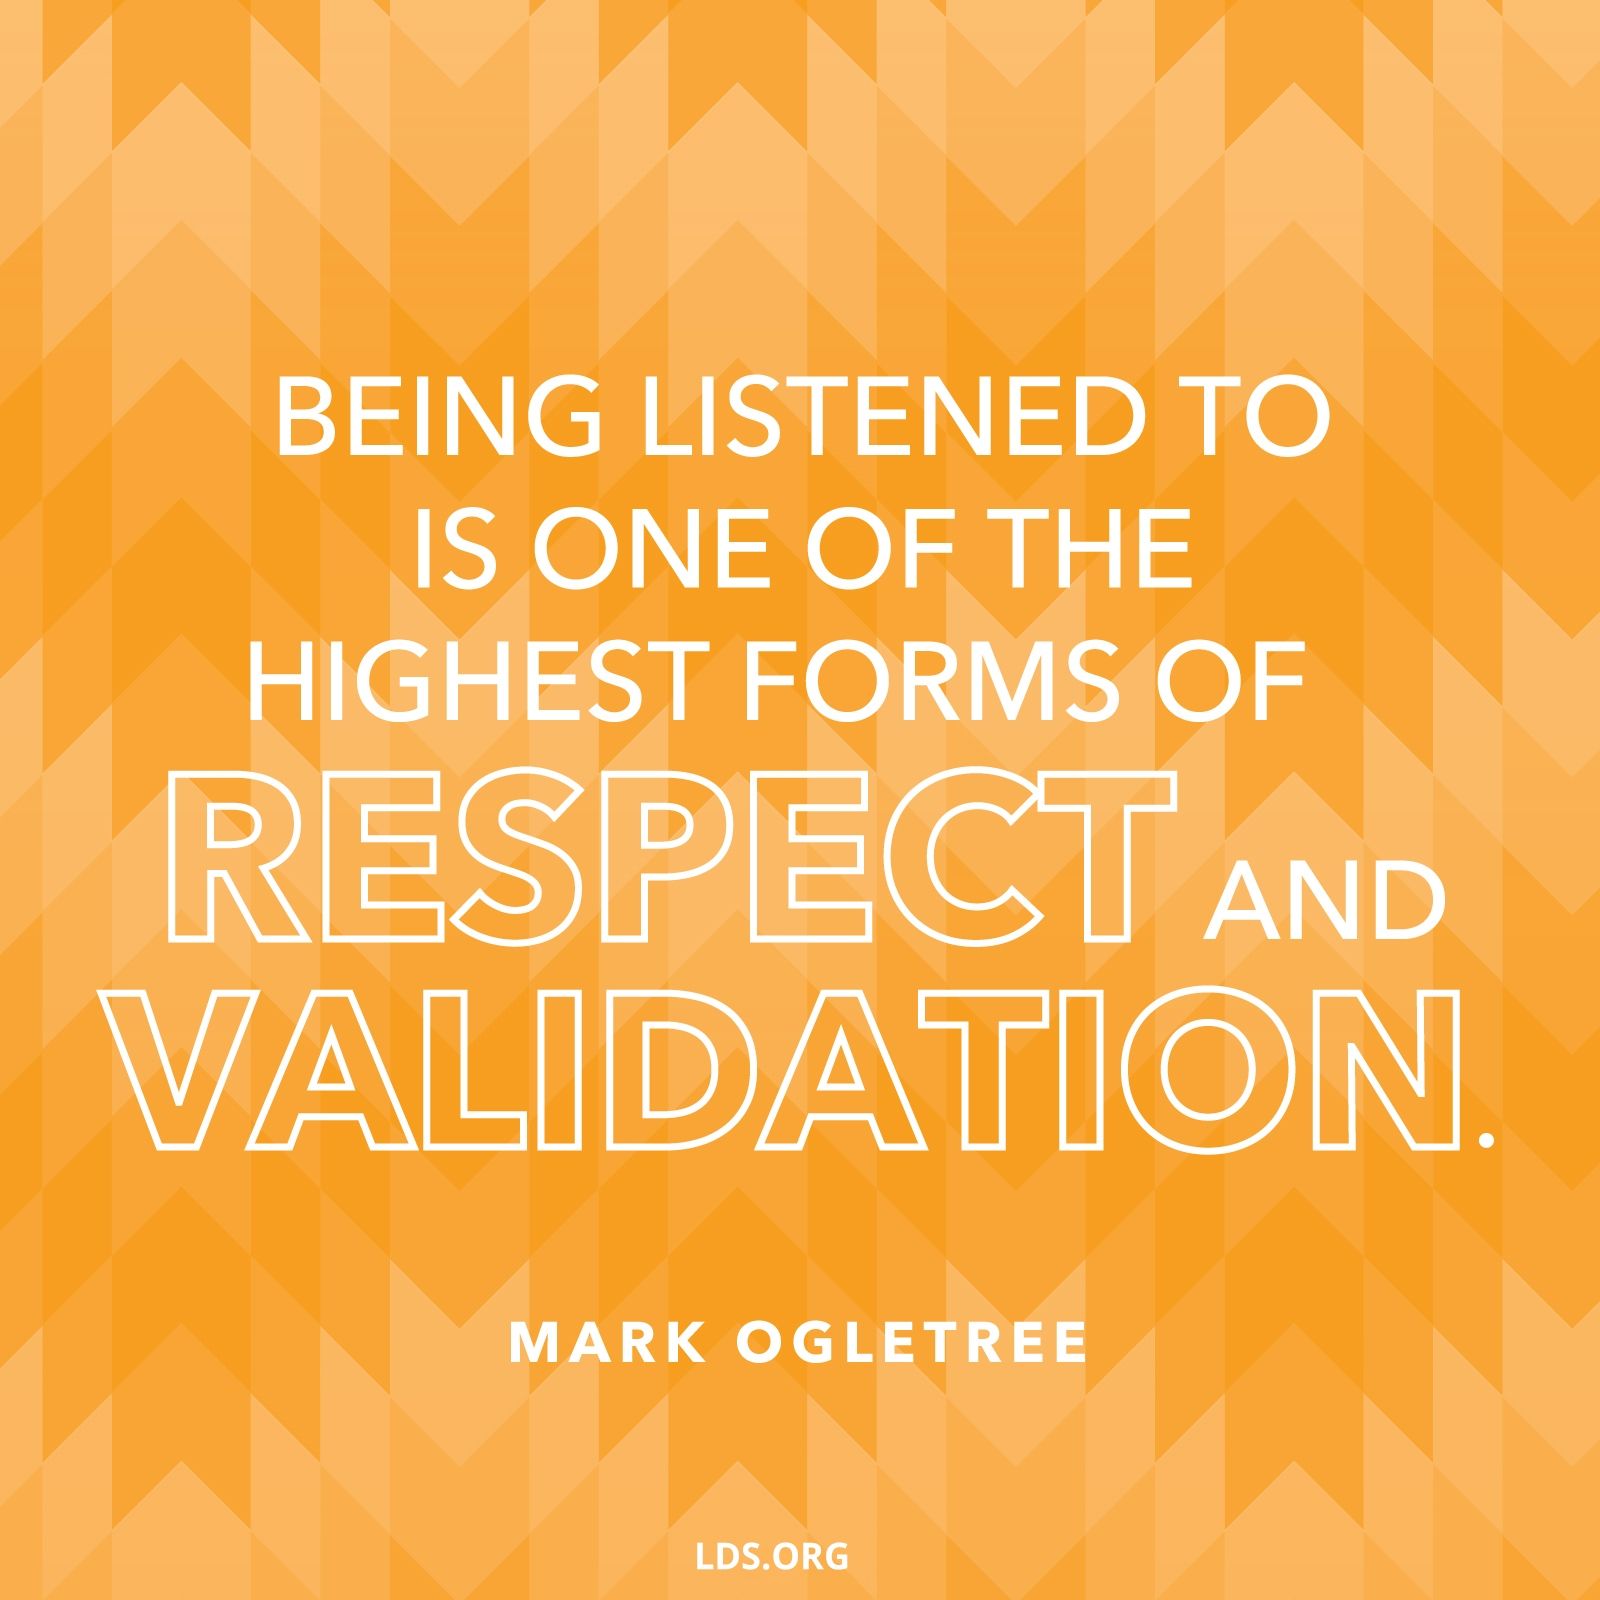 “Being listened to is one of the highest forms of respect and validation.”—Mark Ogletree, “Speak, Listen, and Love”